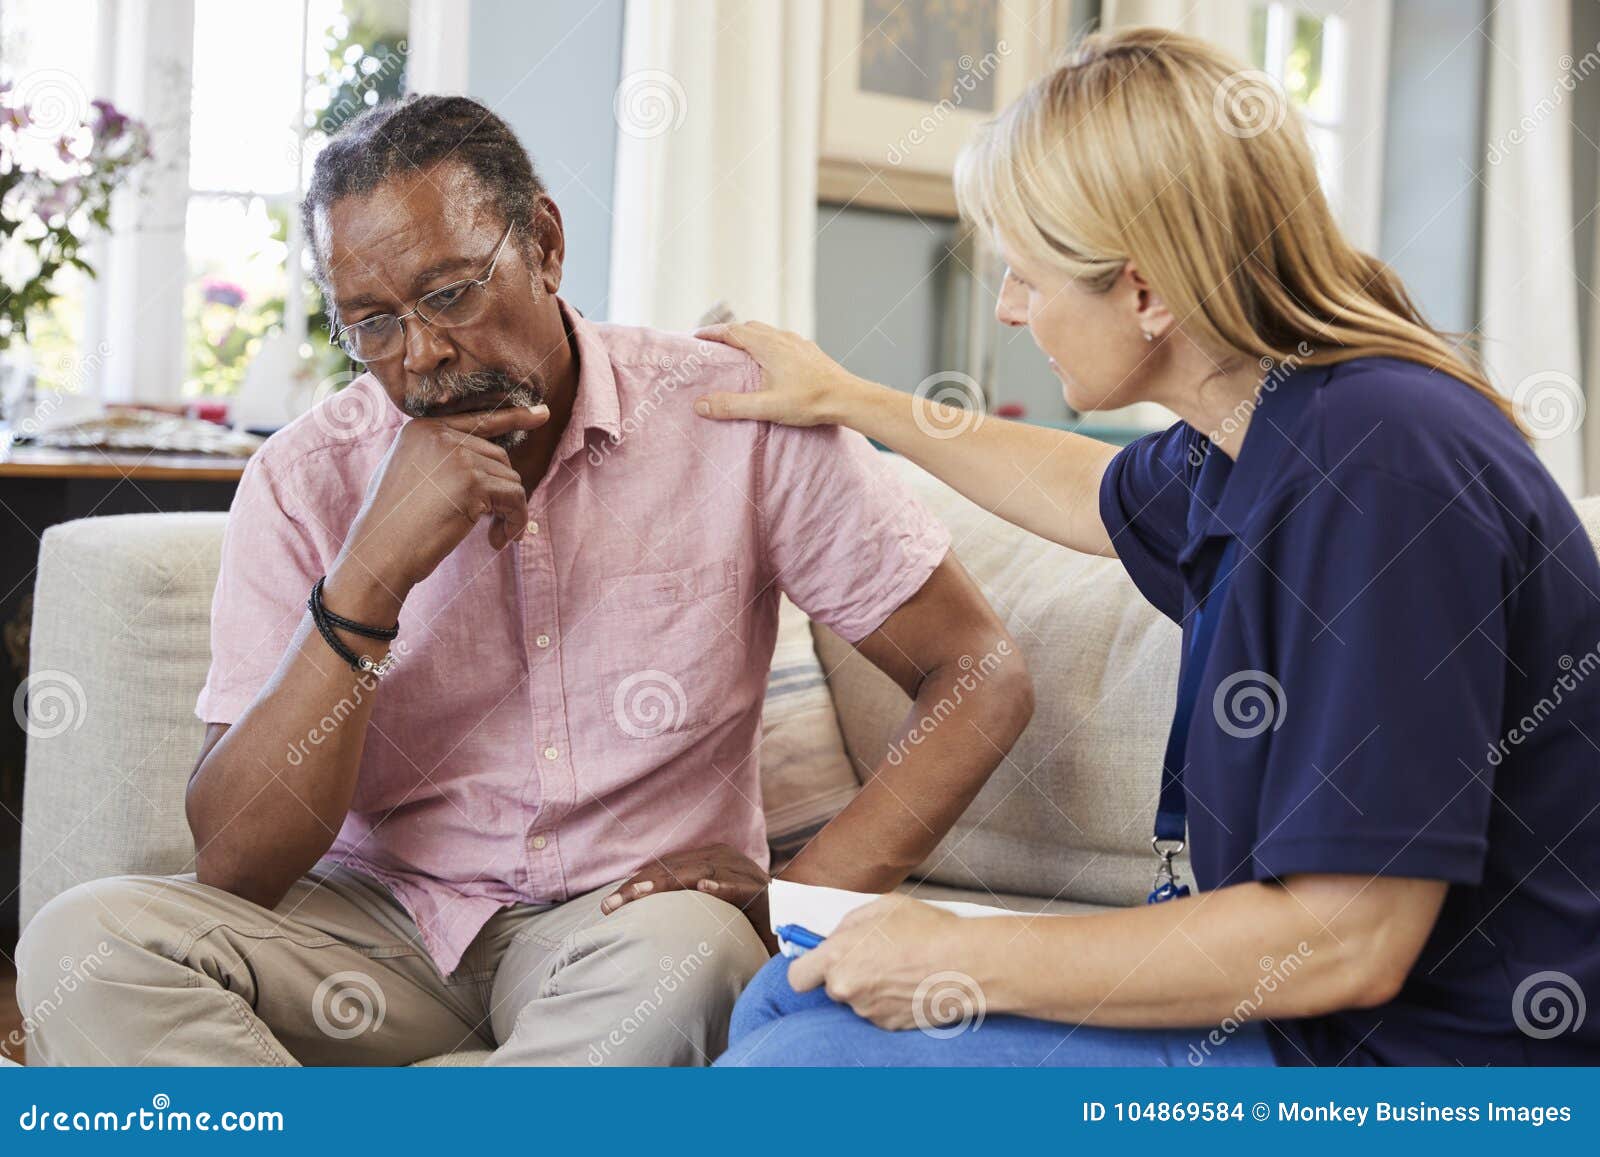 support worker visits senior man suffering with depression